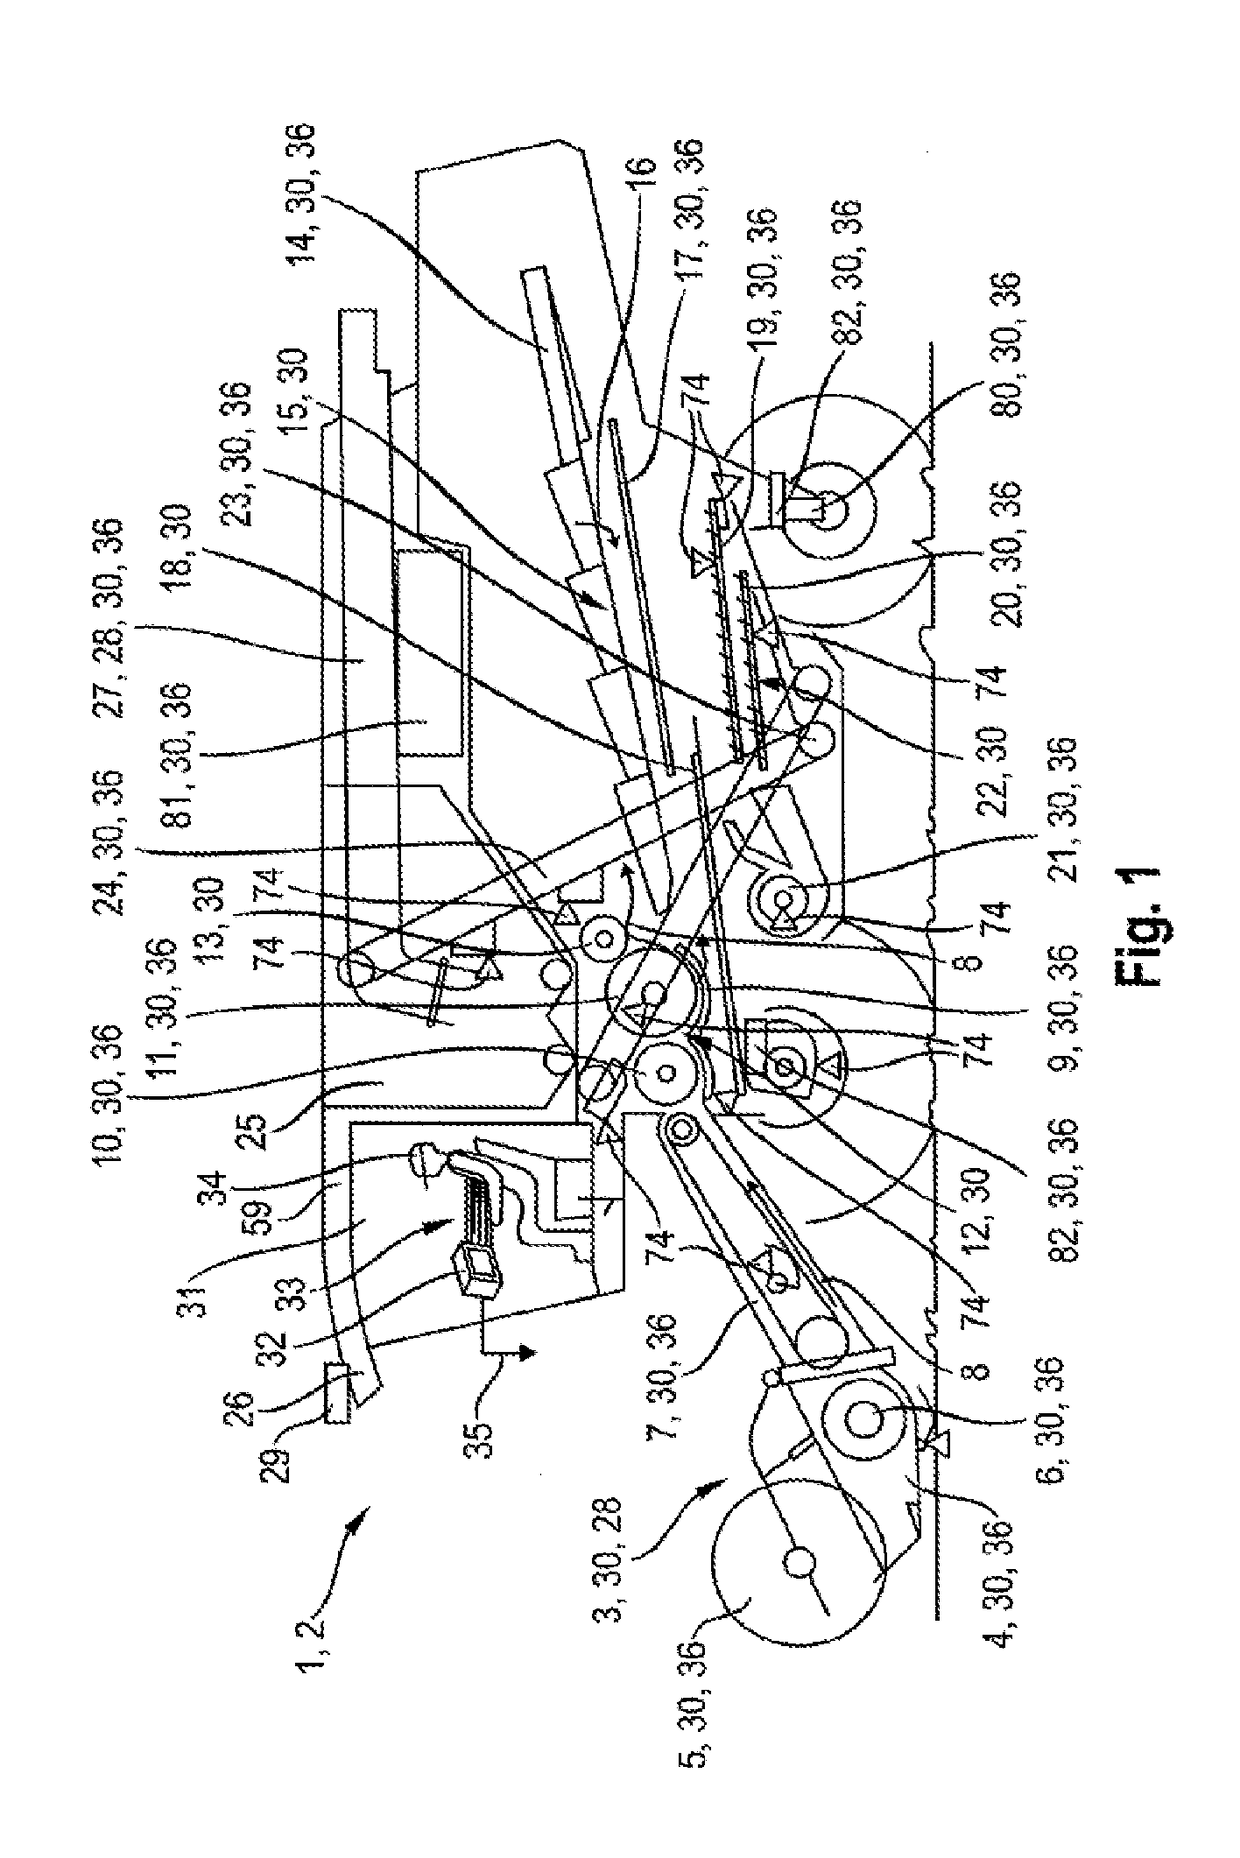 Surroundings detection device for agricultural work machines